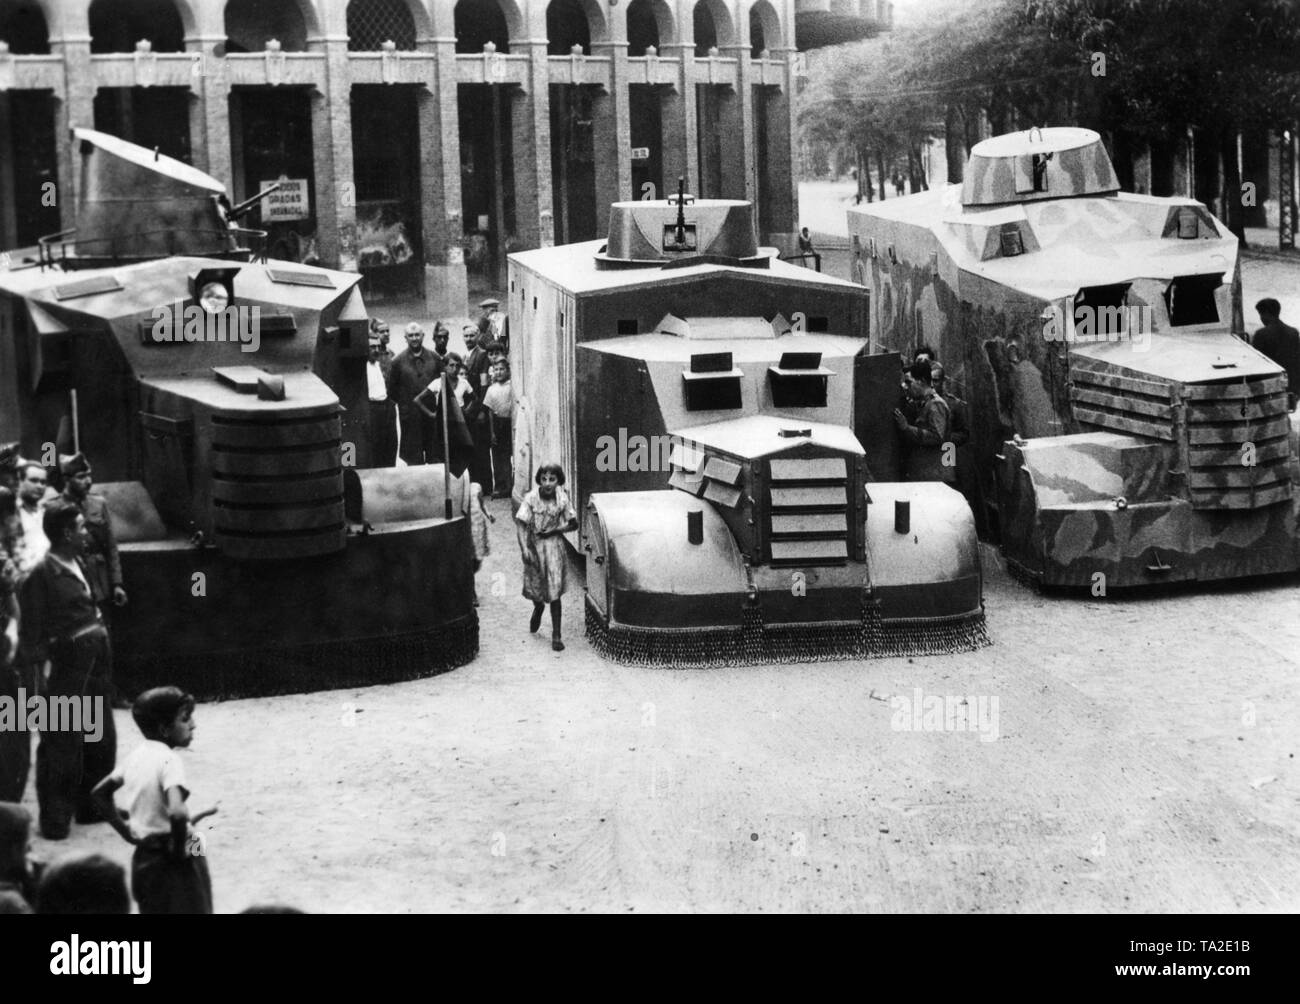 Photo of three Republican armored cars on the Calle de Ramon Pignatelli in front of the bullring in Zaragoza, Aragon, after the outbreak of the Spanish Civil War in 1936. Such armored vehicles used by the Republican troops consisted mostly only of trucks reinforced with armor plates, which were armed with a turret machine gun. The vehicles had little military value due to their size, low armament and  lack of mobility. Therefore they were used primarily for troop transport. The vehicles are being watched by passers-by. Stock Photo